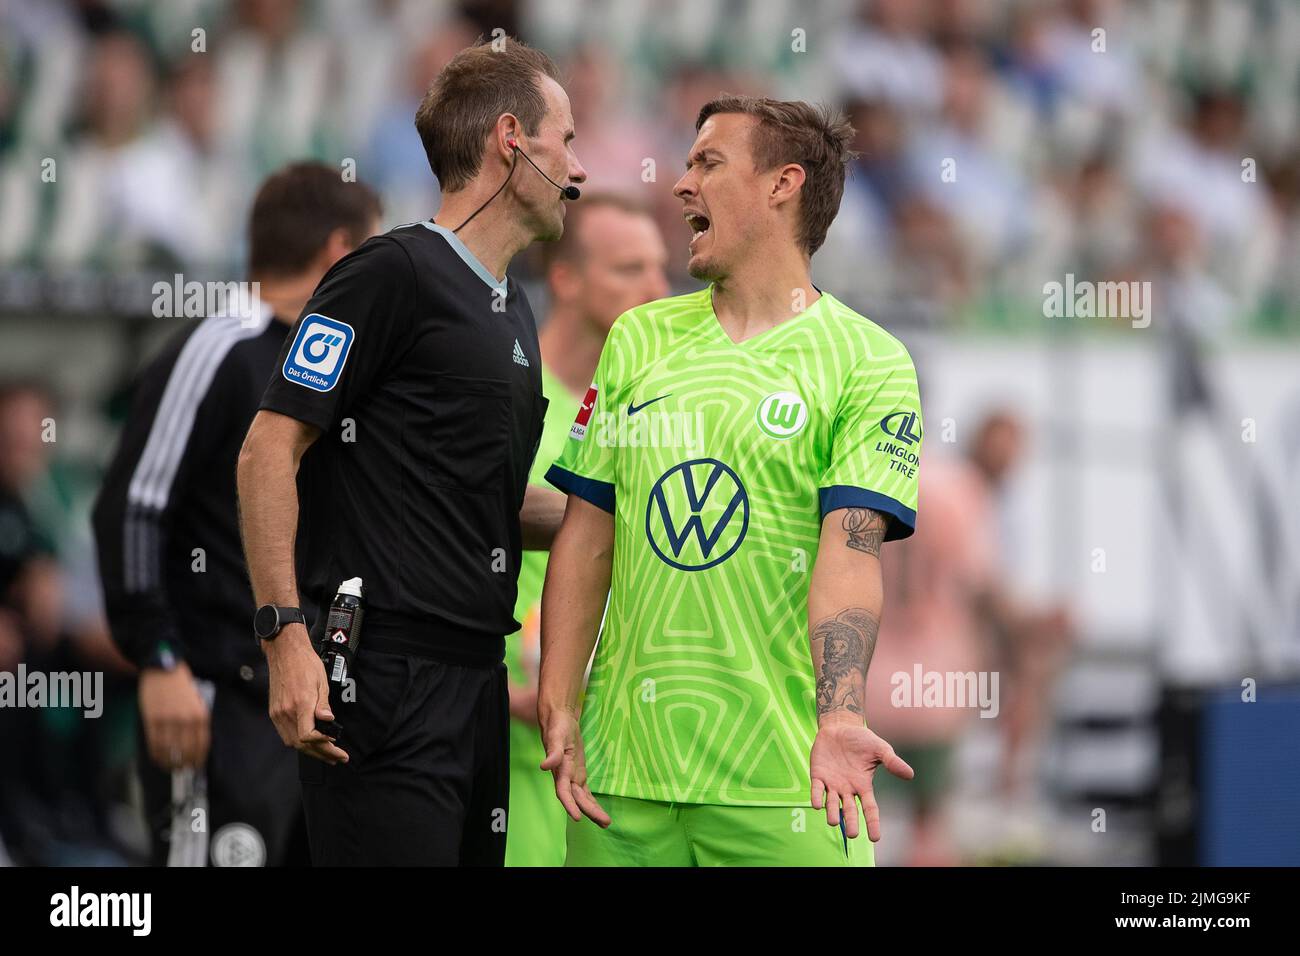 Wolfsburg, Germany. 06th Aug, 2022. Soccer, Bundesliga, VfL Wolfsburg - SV Werder Bremen, Matchday 1, Volkswagen Arena. Wolfsburg's Max Kruse (r) discusses with referee Sascha Stegemann. Credit: Swen Pförtner/dpa - IMPORTANT NOTE: In accordance with the requirements of the DFL Deutsche Fußball Liga and the DFB Deutscher Fußball-Bund, it is prohibited to use or have used photographs taken in the stadium and/or of the match in the form of sequence pictures and/or video-like photo series./dpa/Alamy Live News Stock Photo